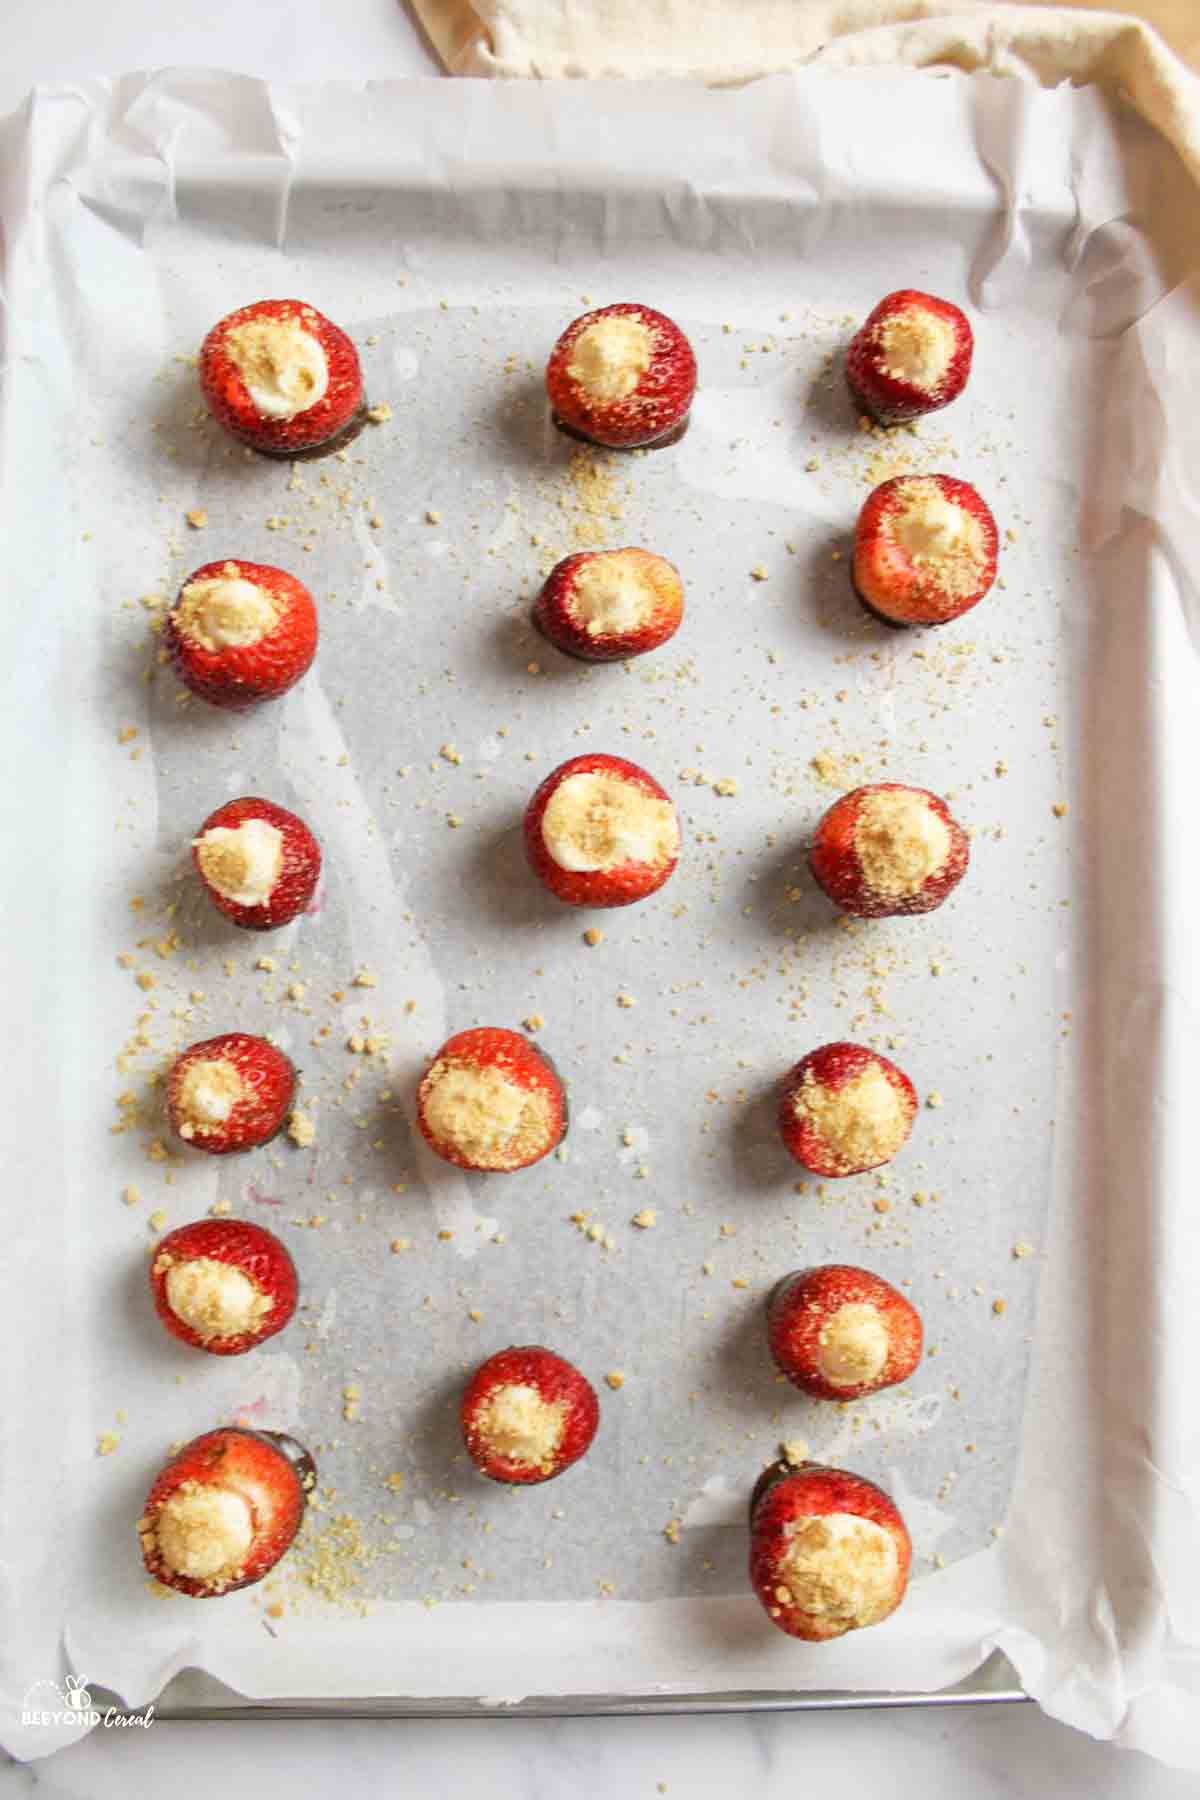 graham cracker crumb topped cheesecake stuffed strawberries on parchment paper lined baking sheet.